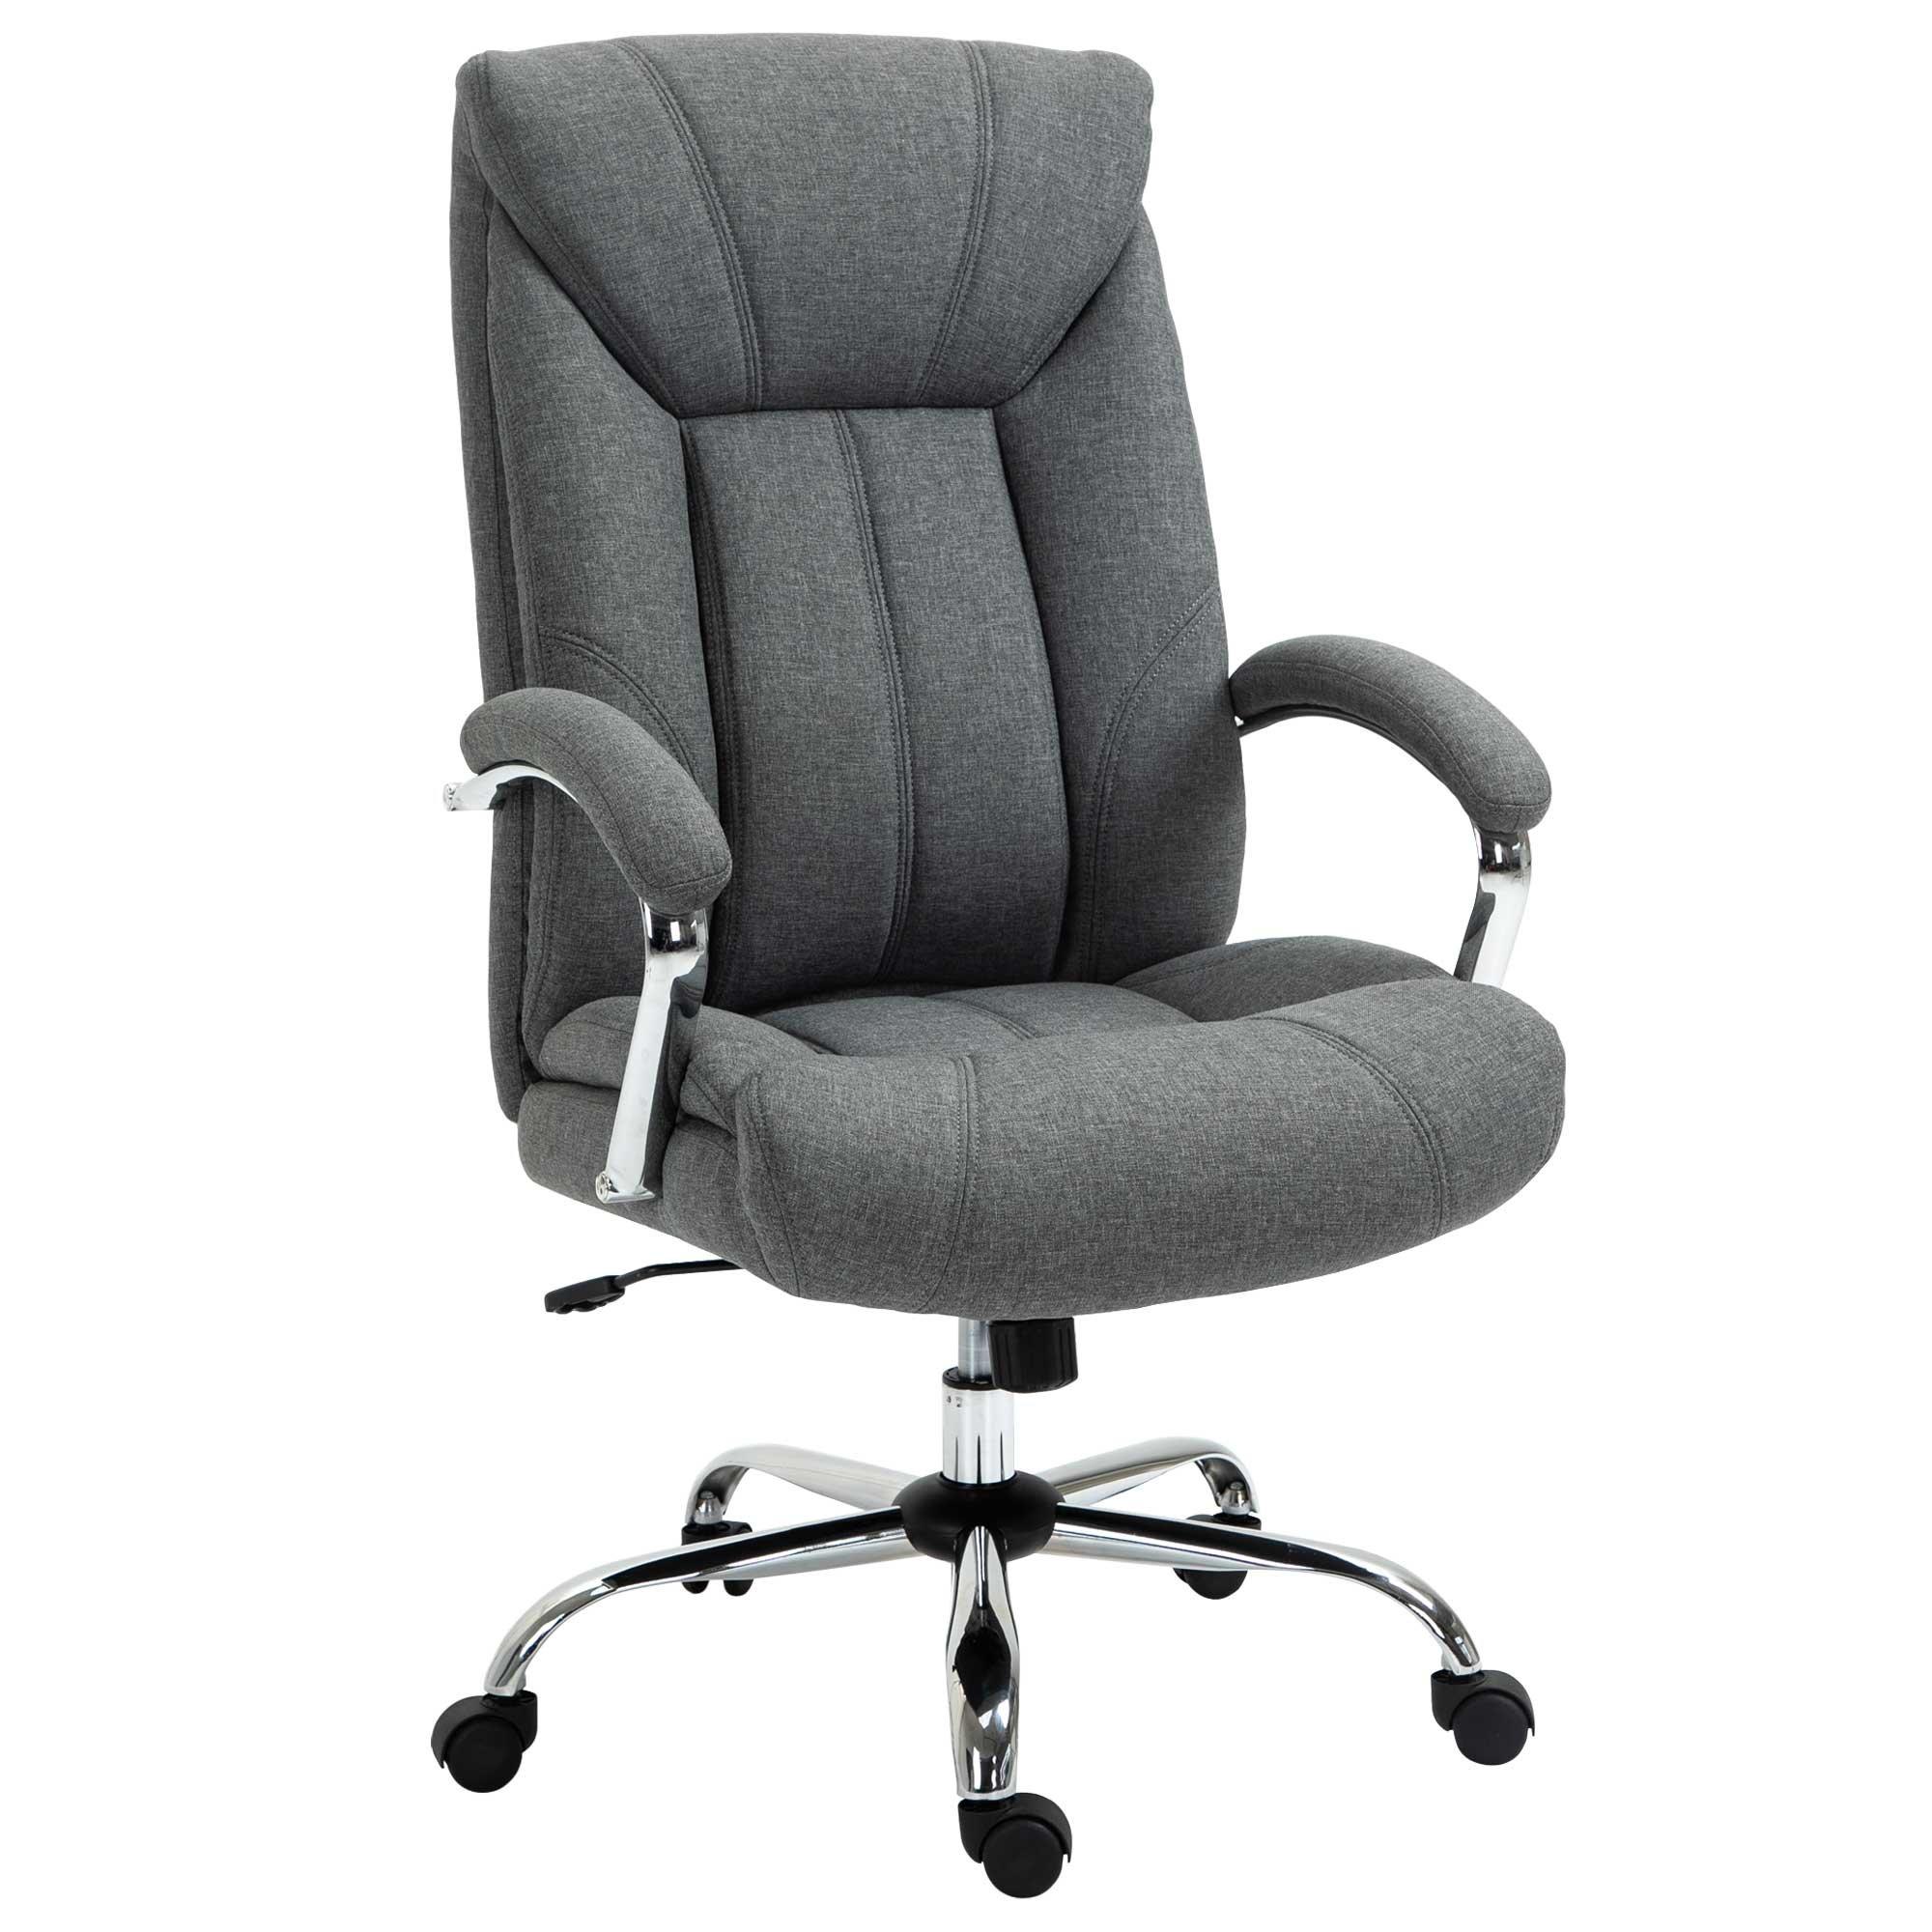 High Back Home Office Chair Computer Desk Chair with Arm, Swivel Wheels